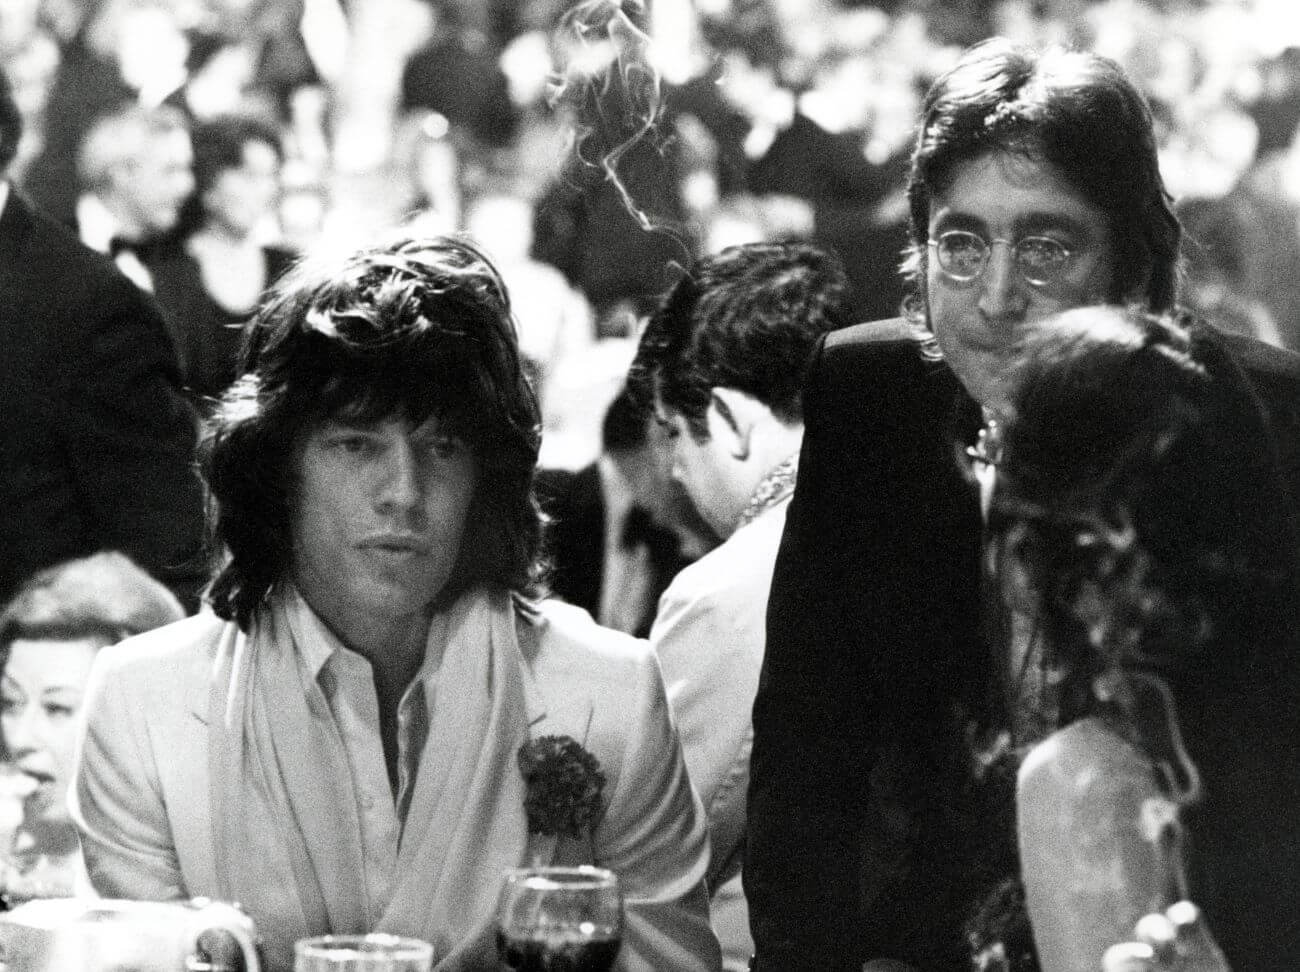 A black and white picture of Mick Jagger and John Lennon at a table together.